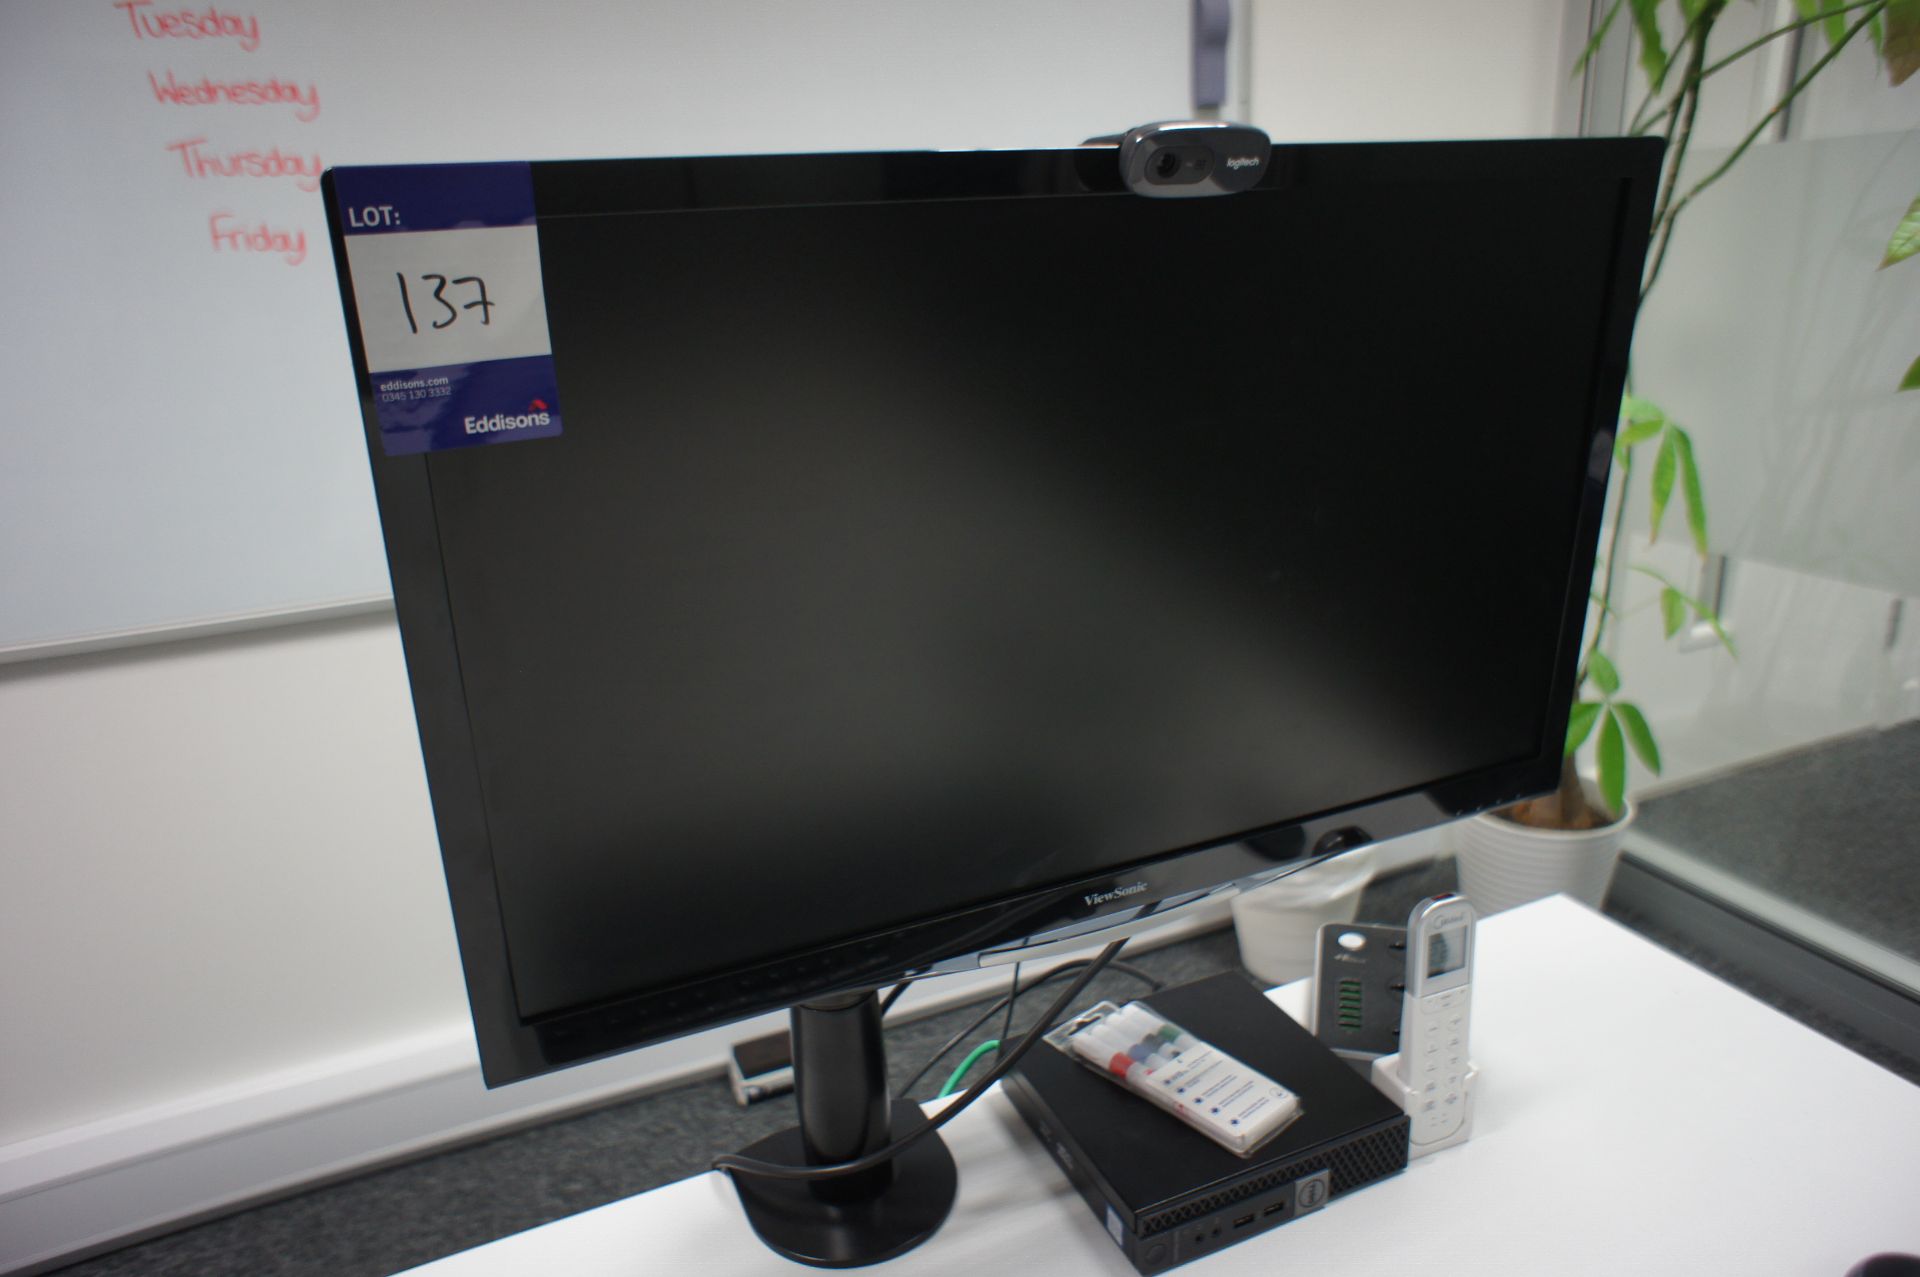 Viewsonic VX2757-MHD LCD monitor, with monitor arm, and Logitech webcam. Computer not included